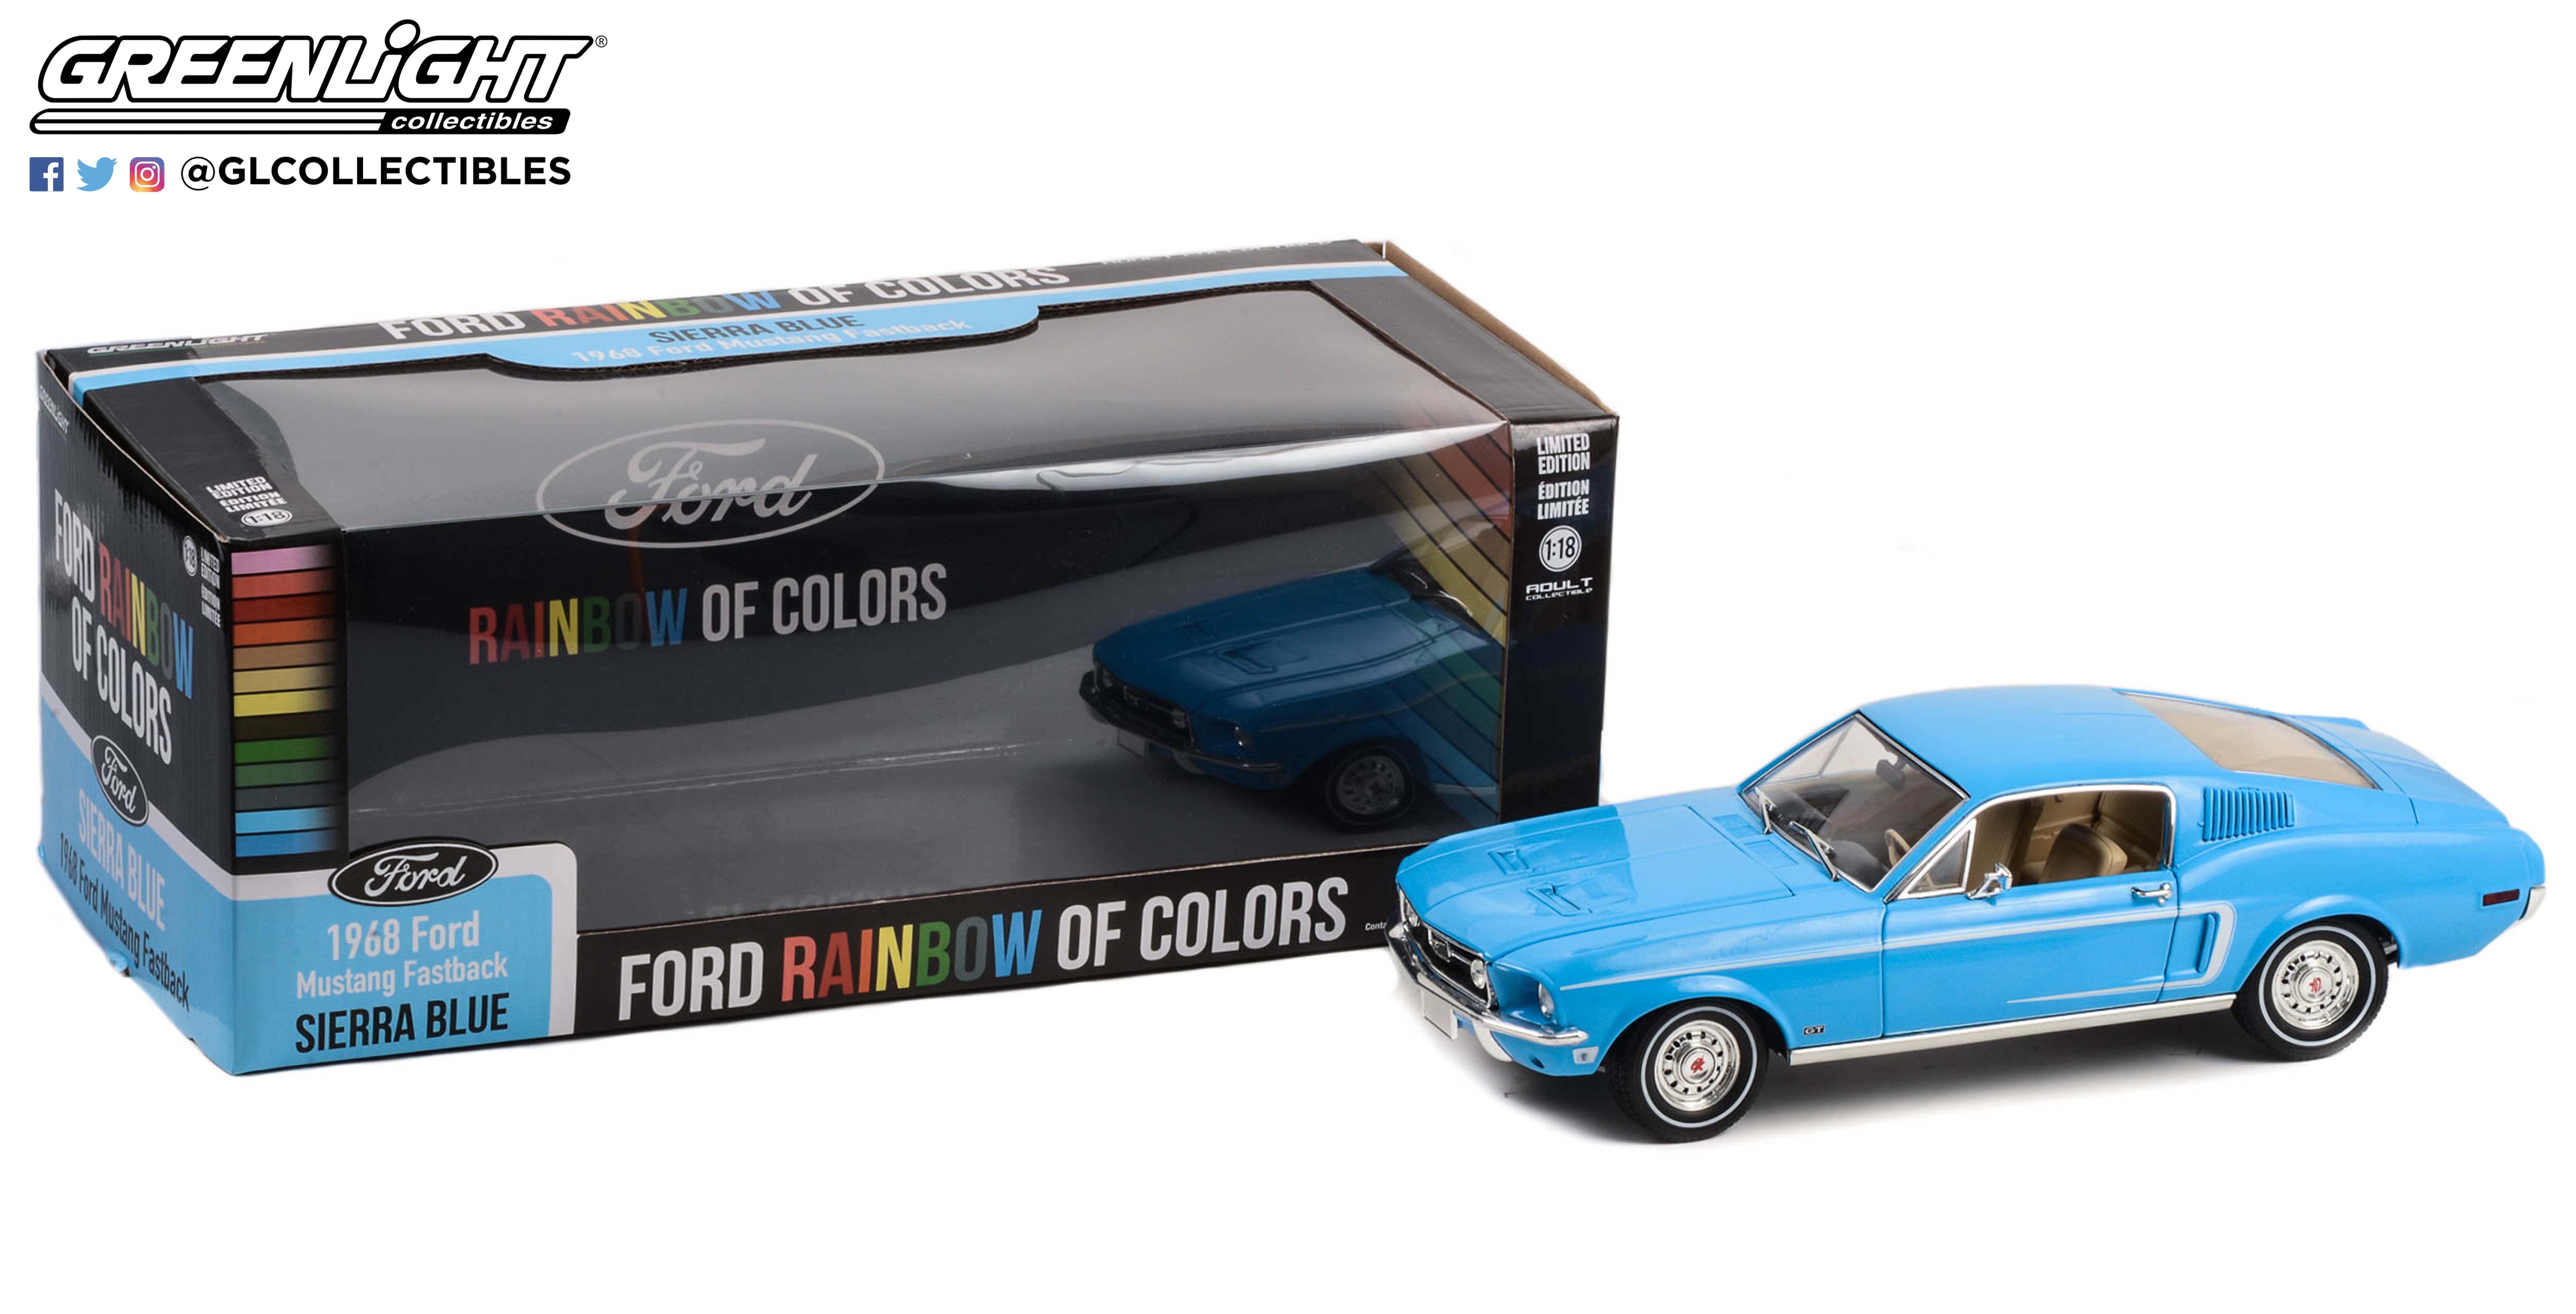 GreenLight 1:18 1968 Ford Mustang Fastback Ford Rainbow Of Colors